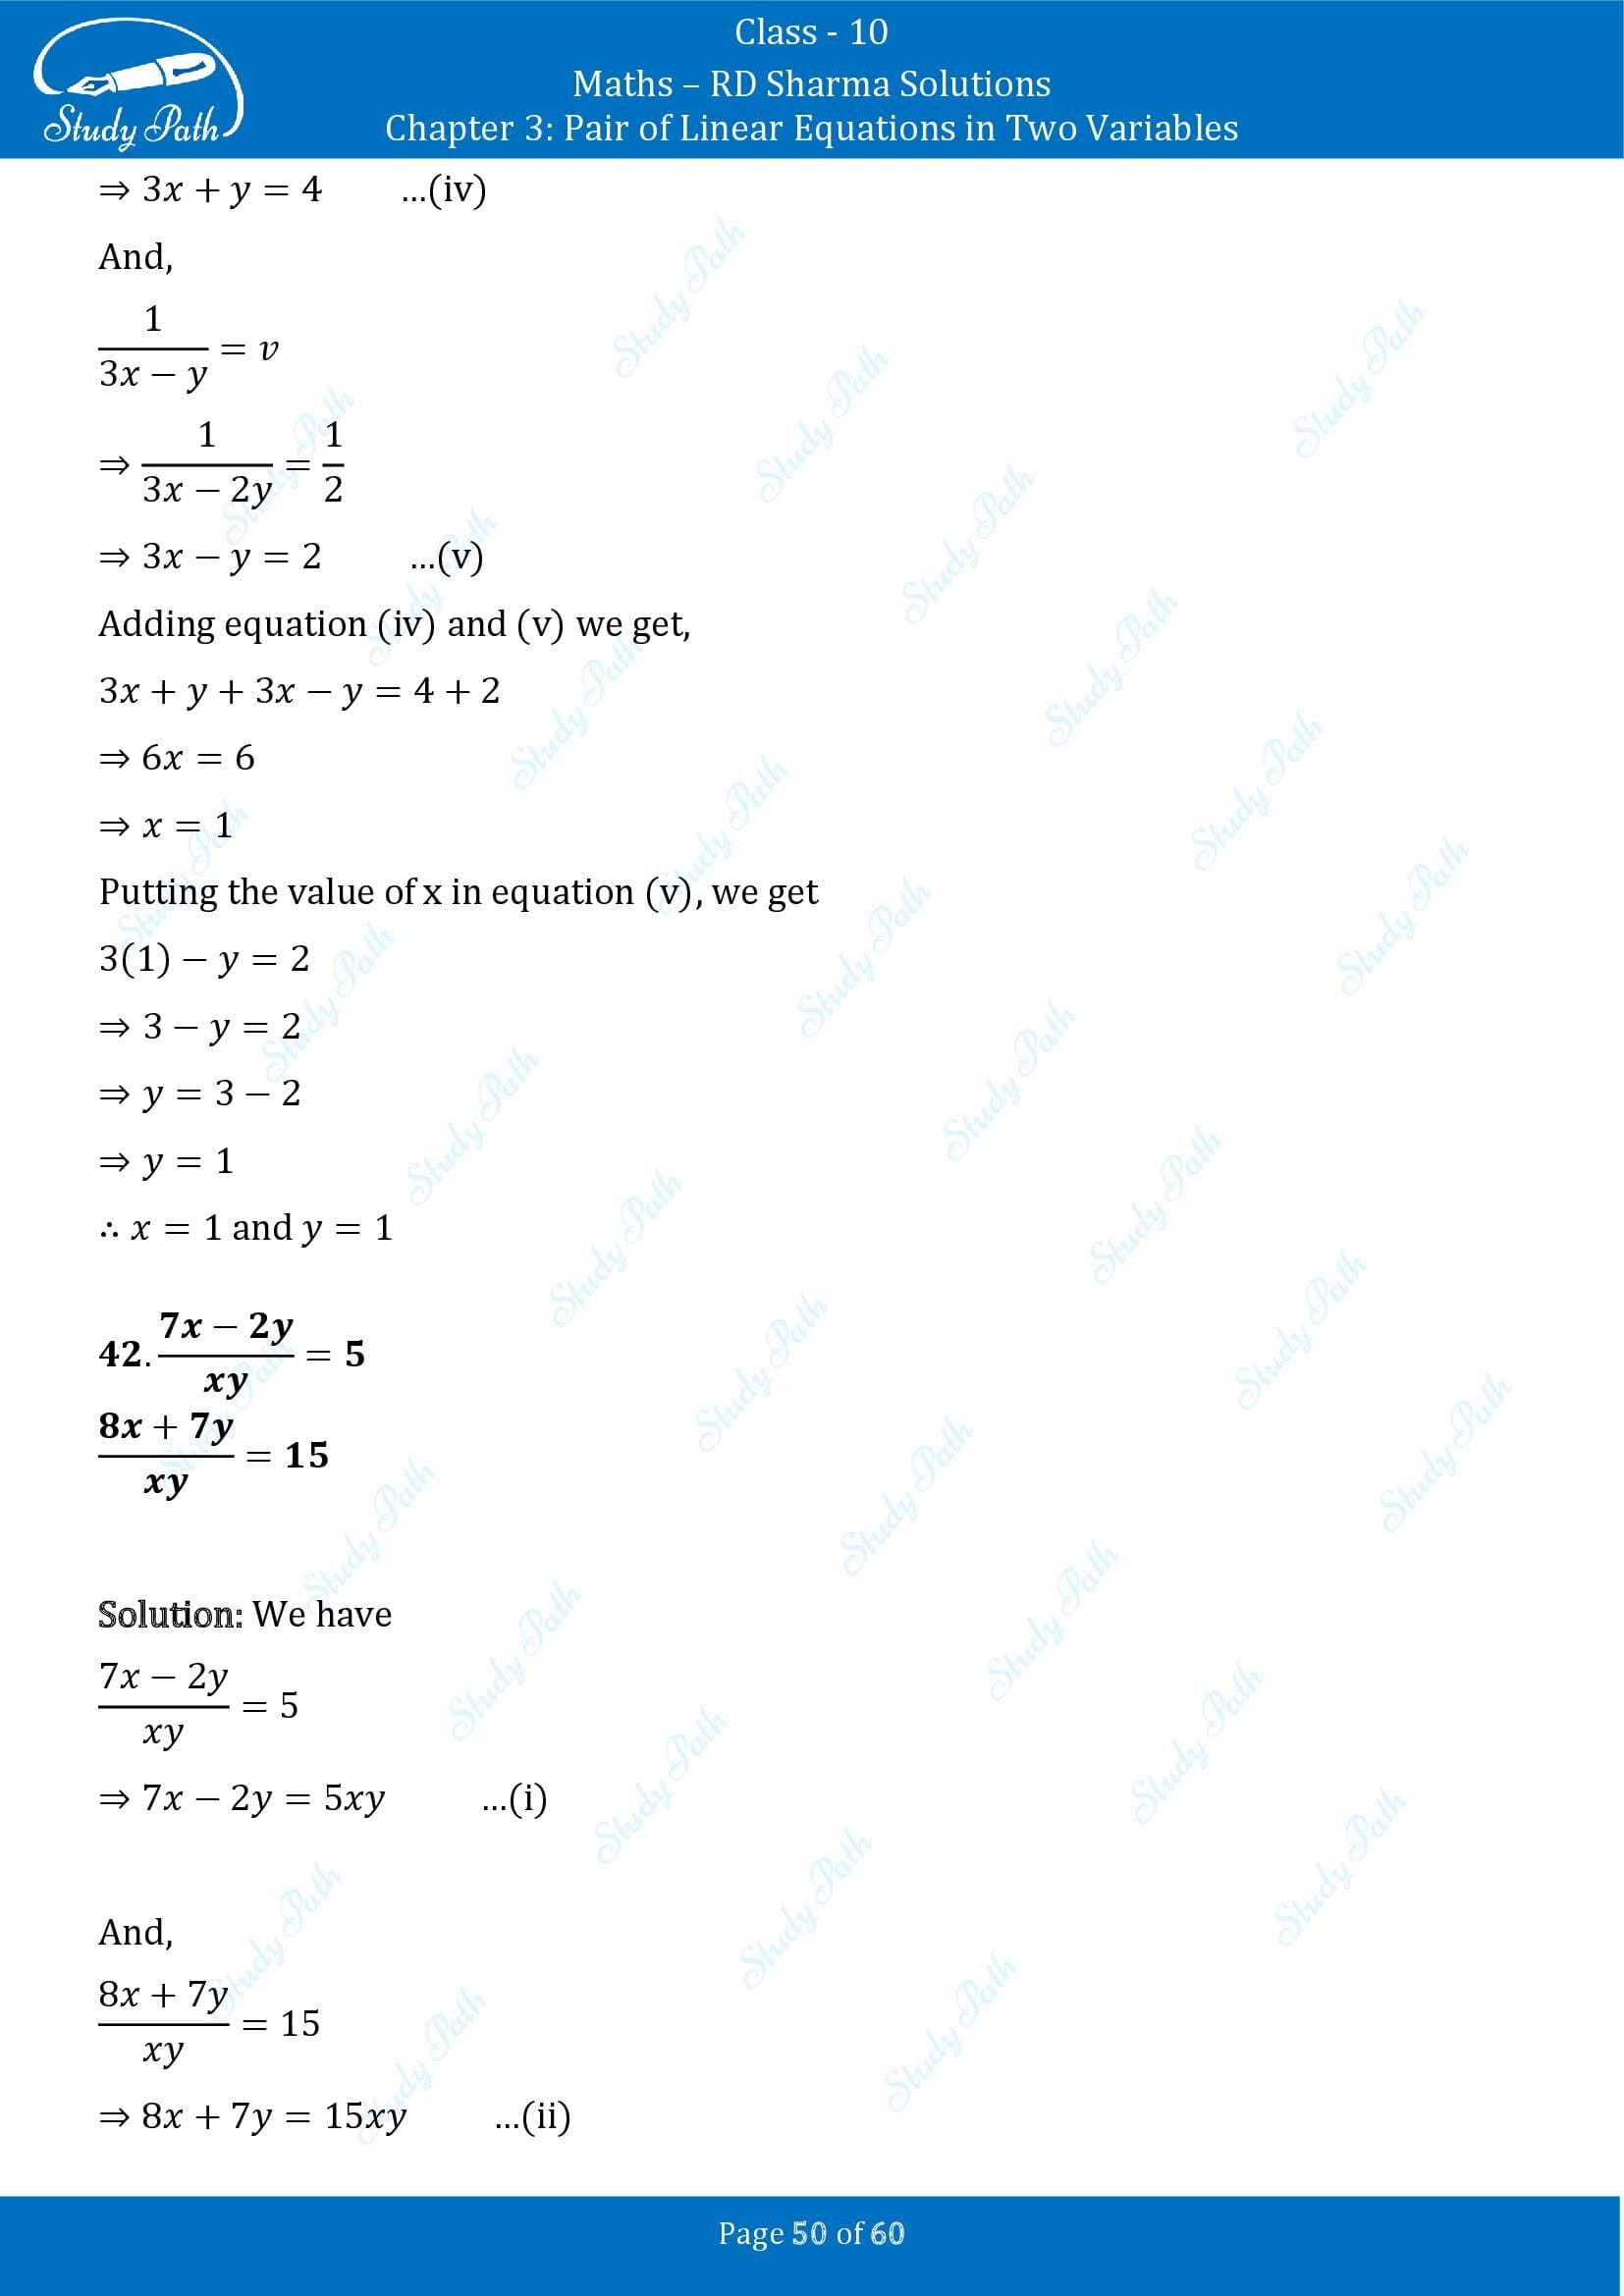 RD Sharma Solutions Class 10 Chapter 3 Pair of Linear Equations in Two Variables Exercise 3.3 00050